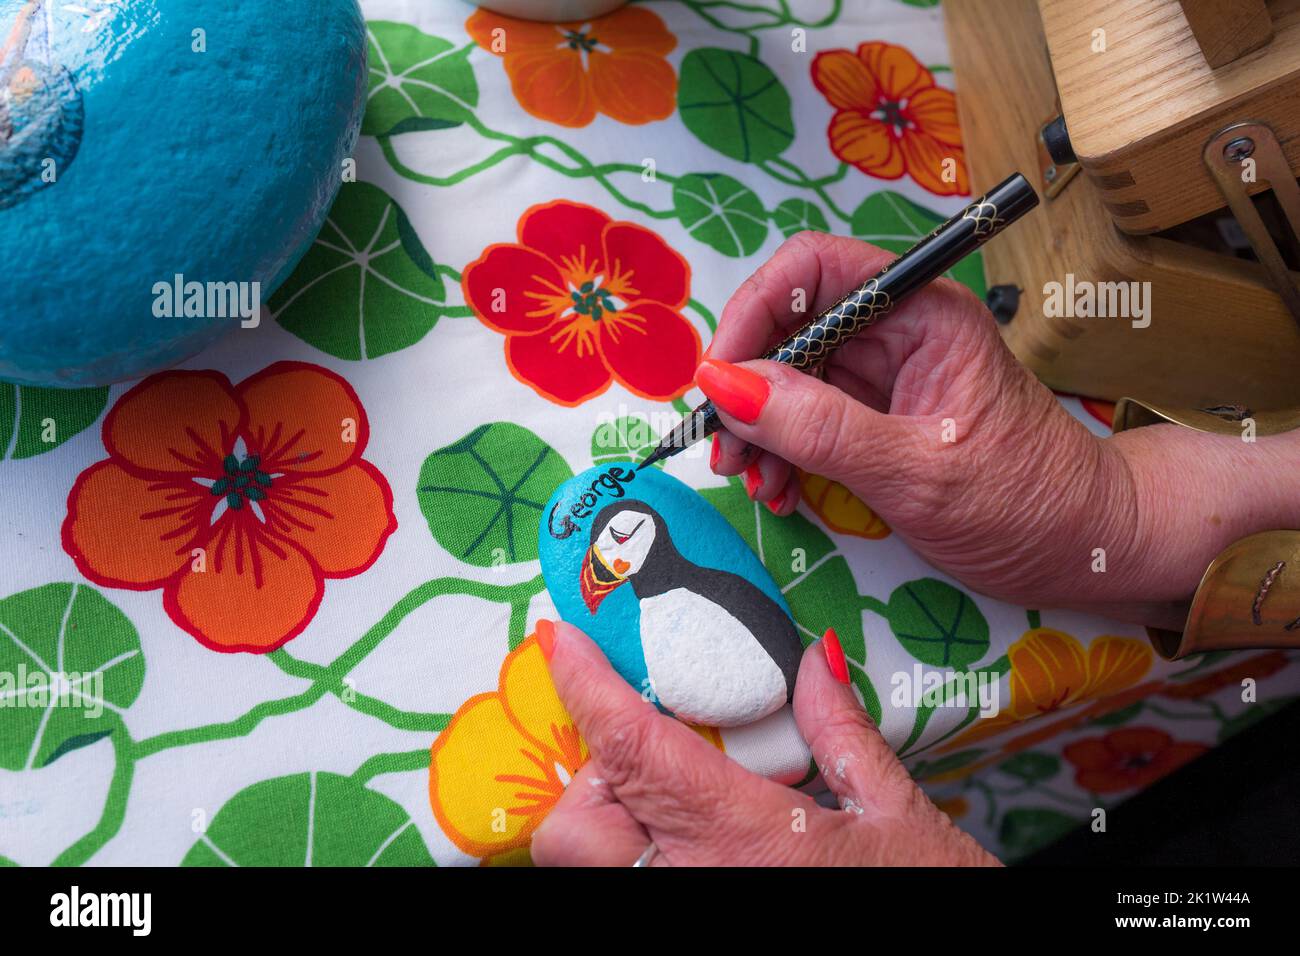 Female artist writing the name George with a black felt pen onto a painted stone with a puffin at a market stall. Stock Photo